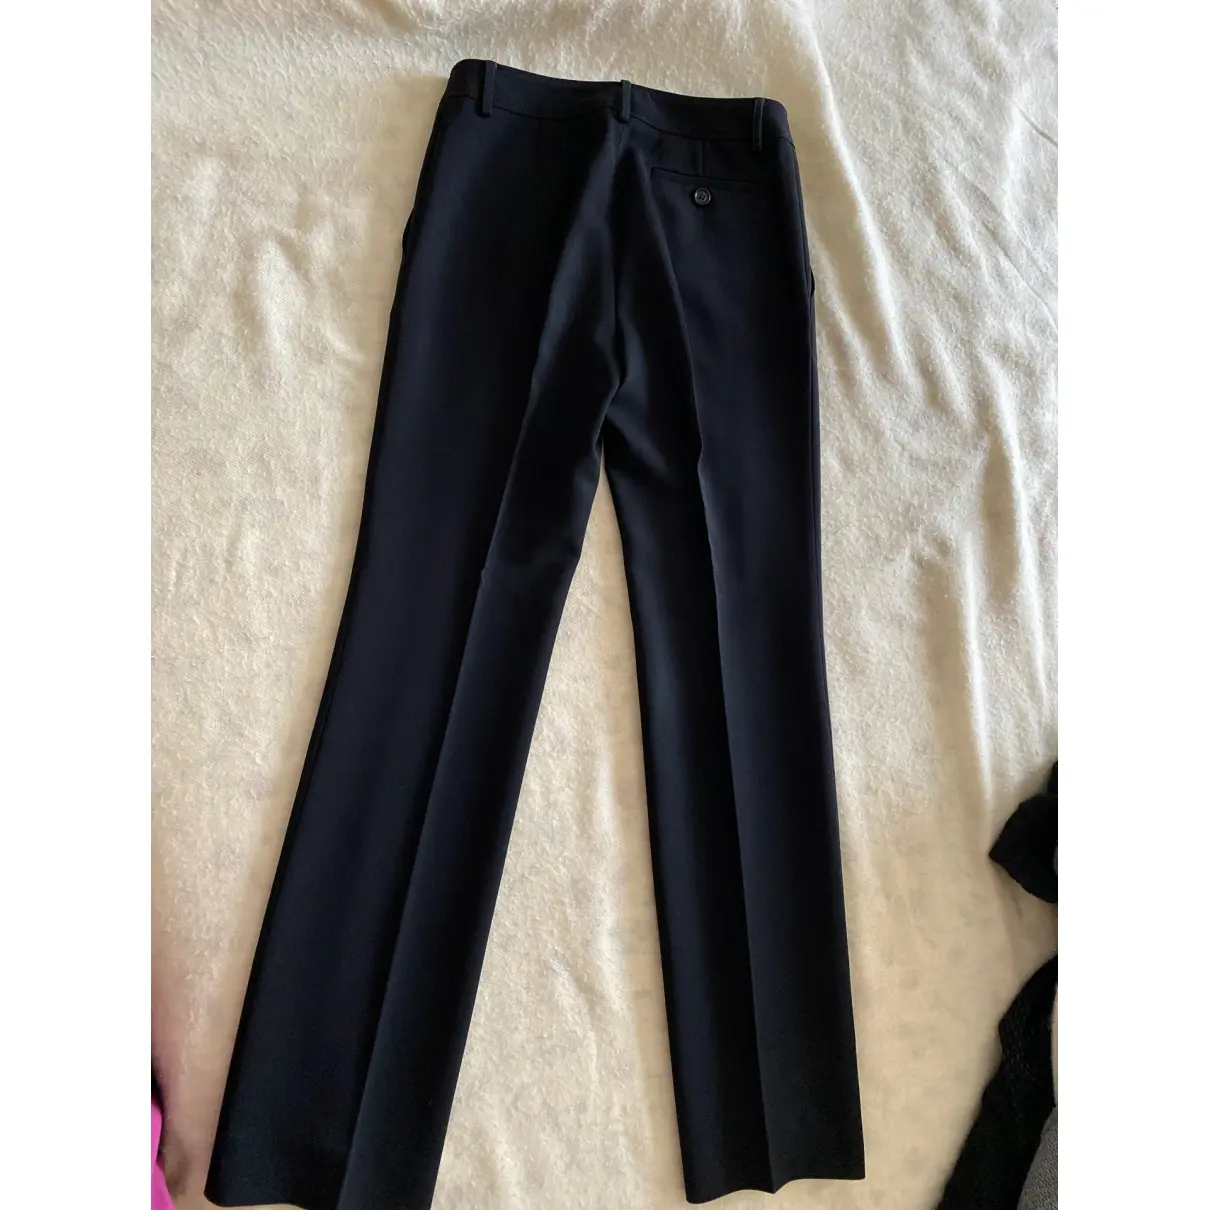 Buy Moschino Cheap And Chic Straight pants online